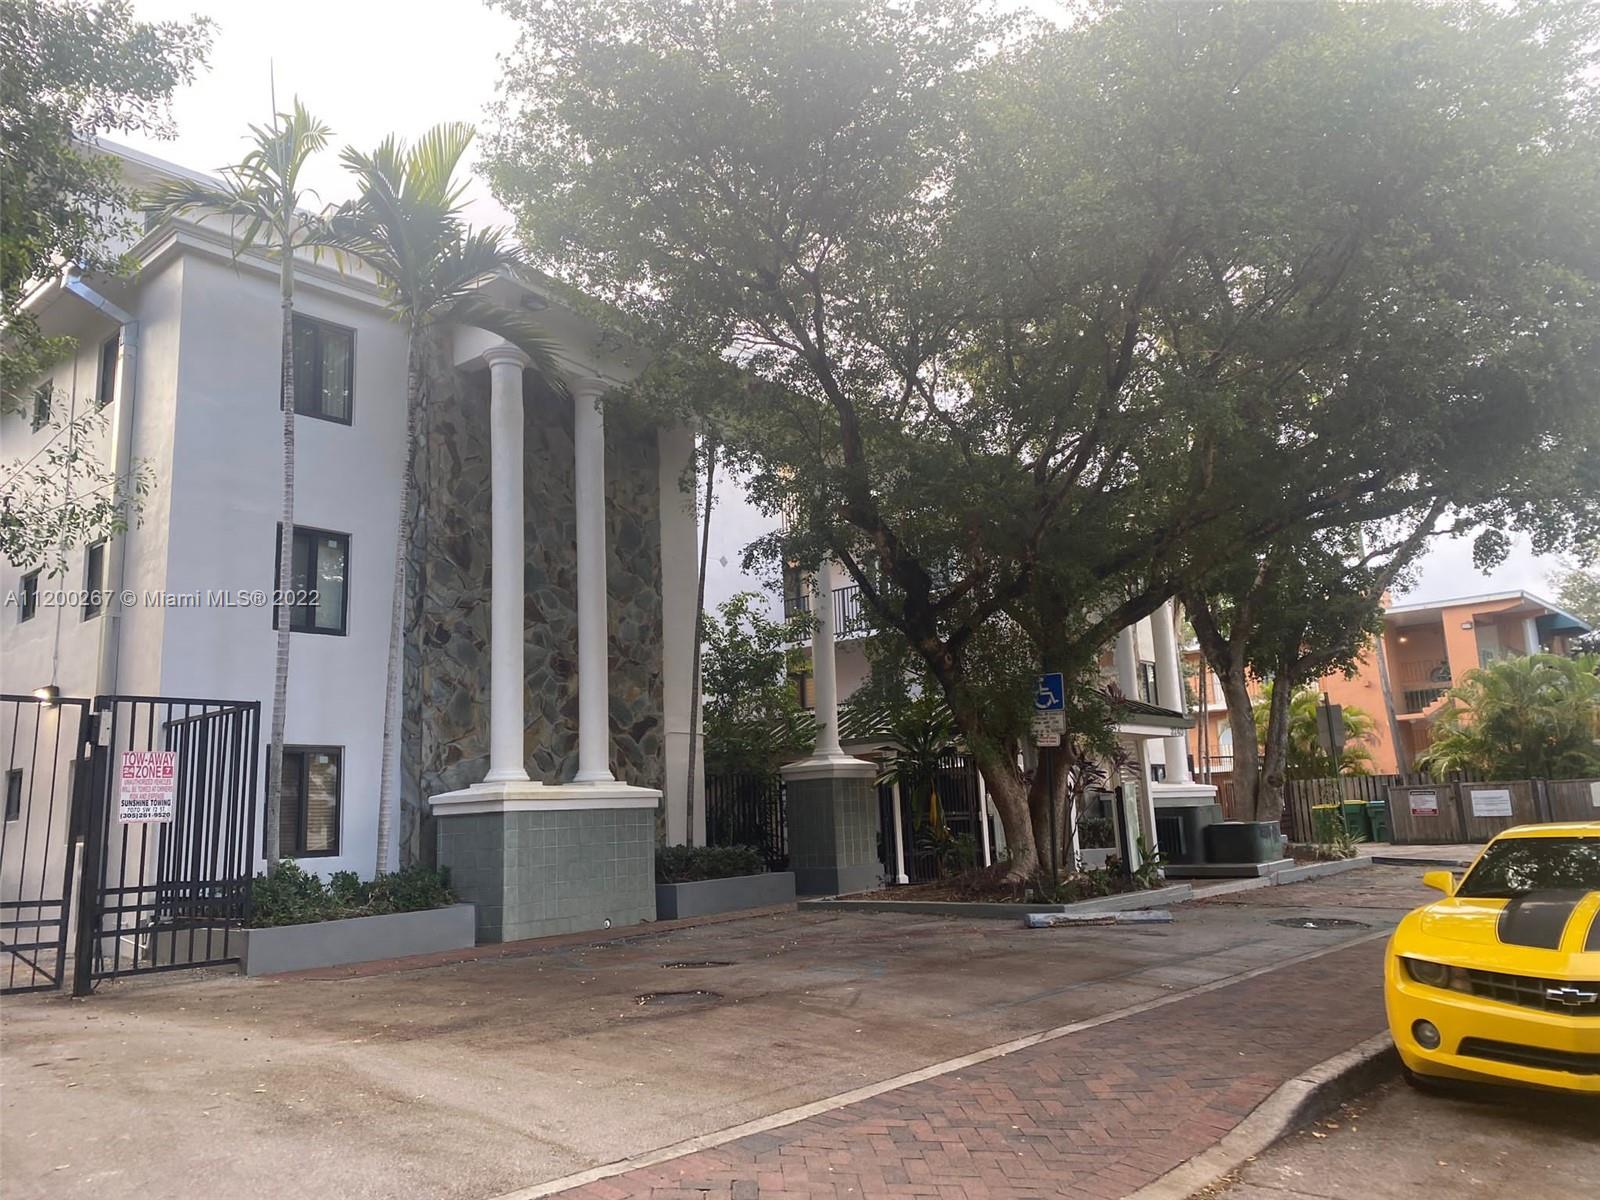 Fully furnished condo in the heart of Coconut Grove.  Walking distance to all the attactions that the Grover may offer. Freshly painted building, impact windows and impact doors.